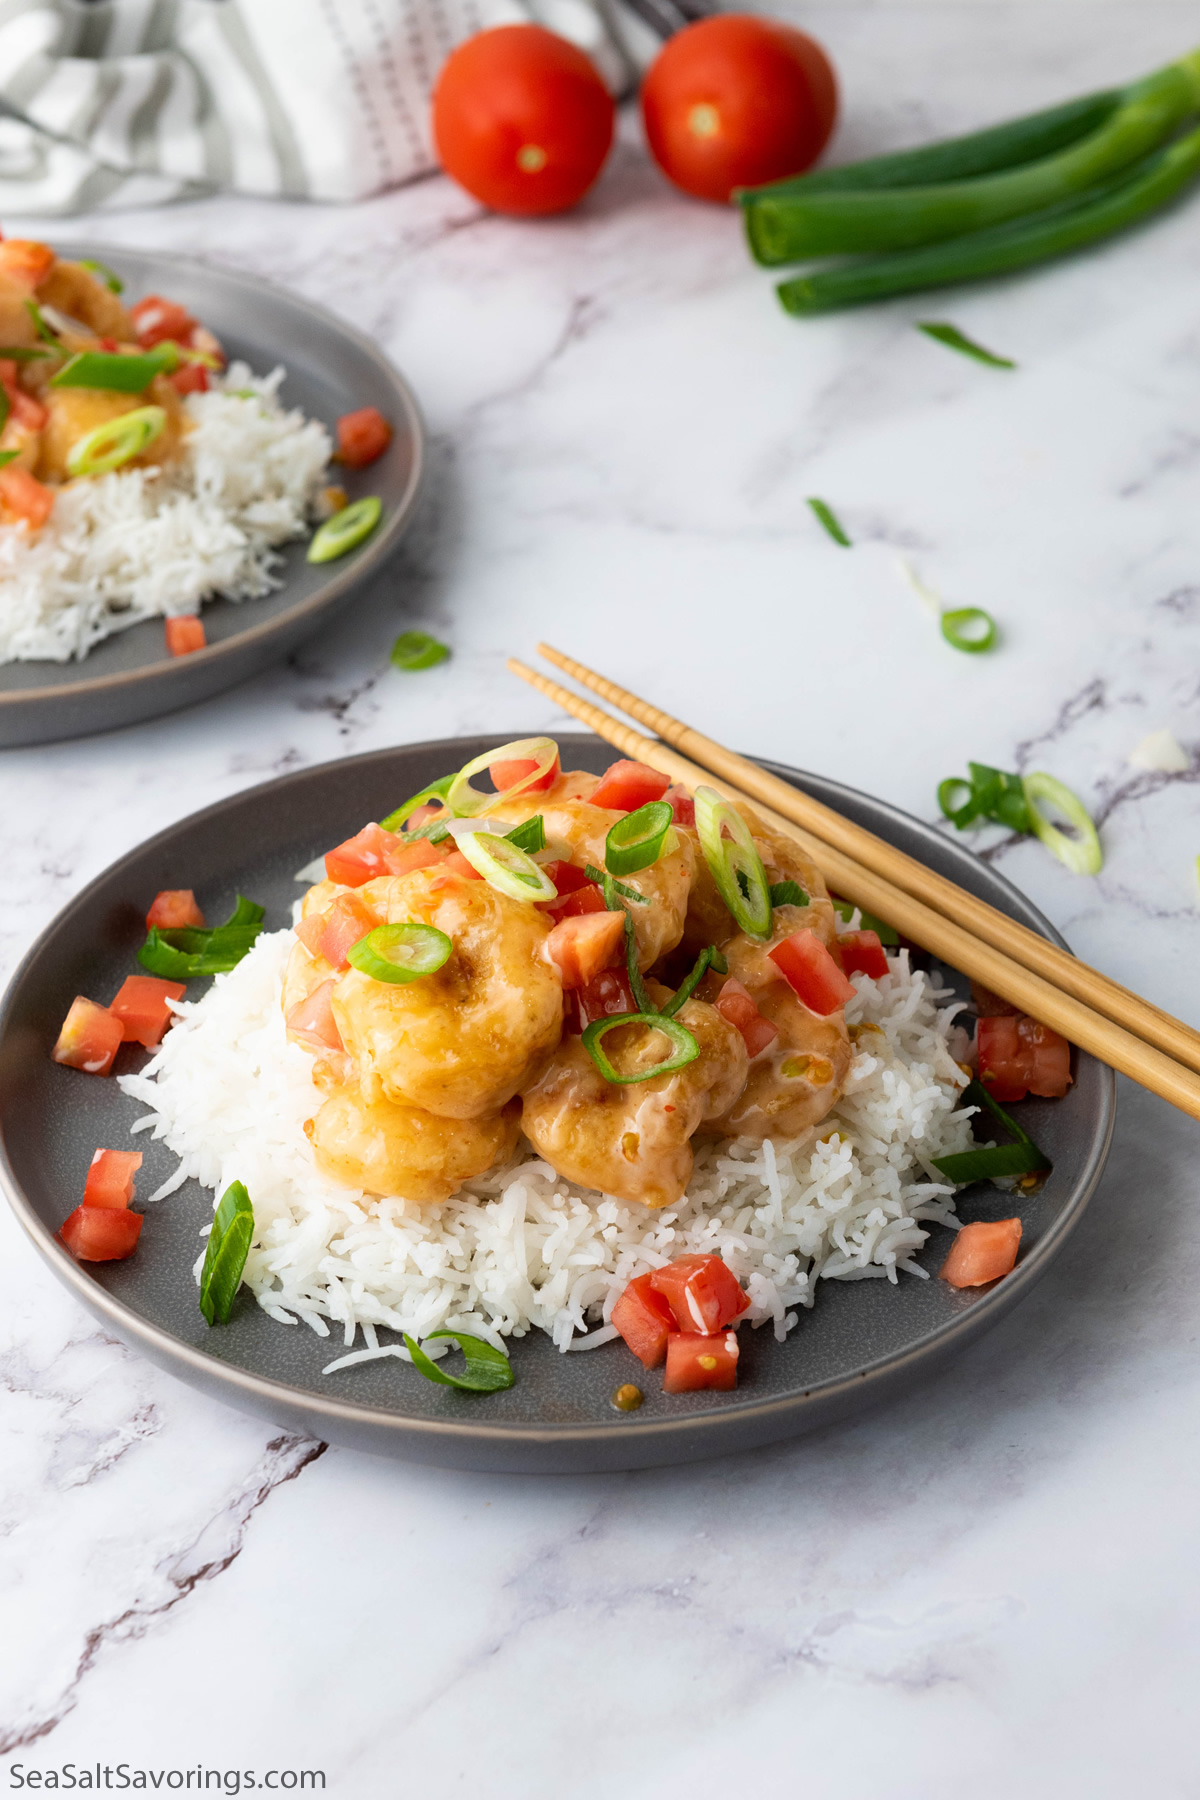 Bang Bang Shrimp over white rice in a bowl, showcasing the crispy shrimp topped with spicy, creamy sauce